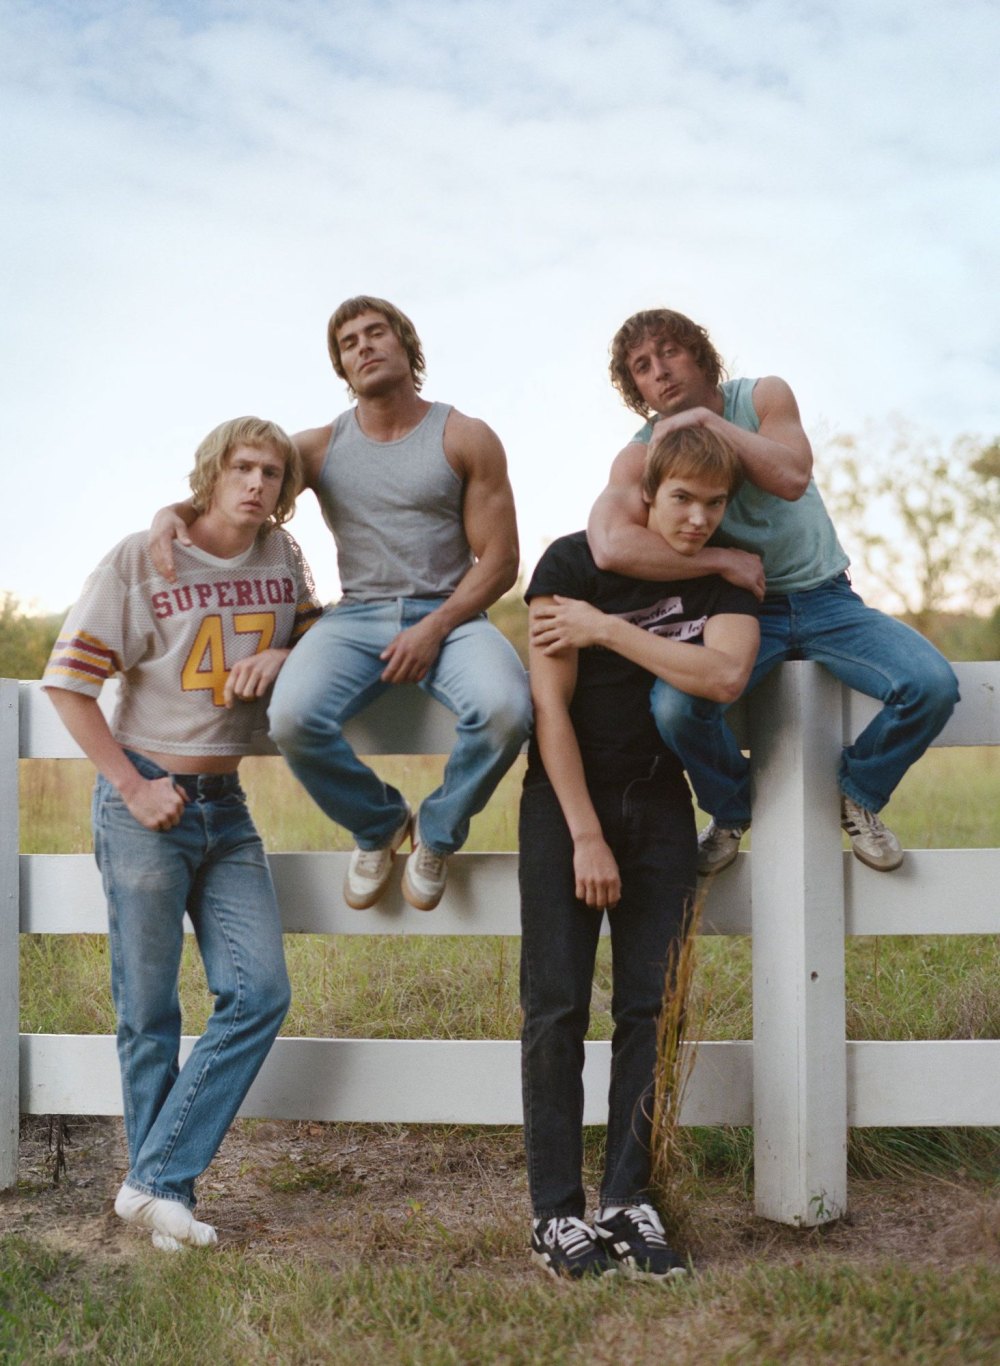 Get a First Look at Zac Efron and Jeremy Allen White as Wrestling Brothers in The Iron Claw